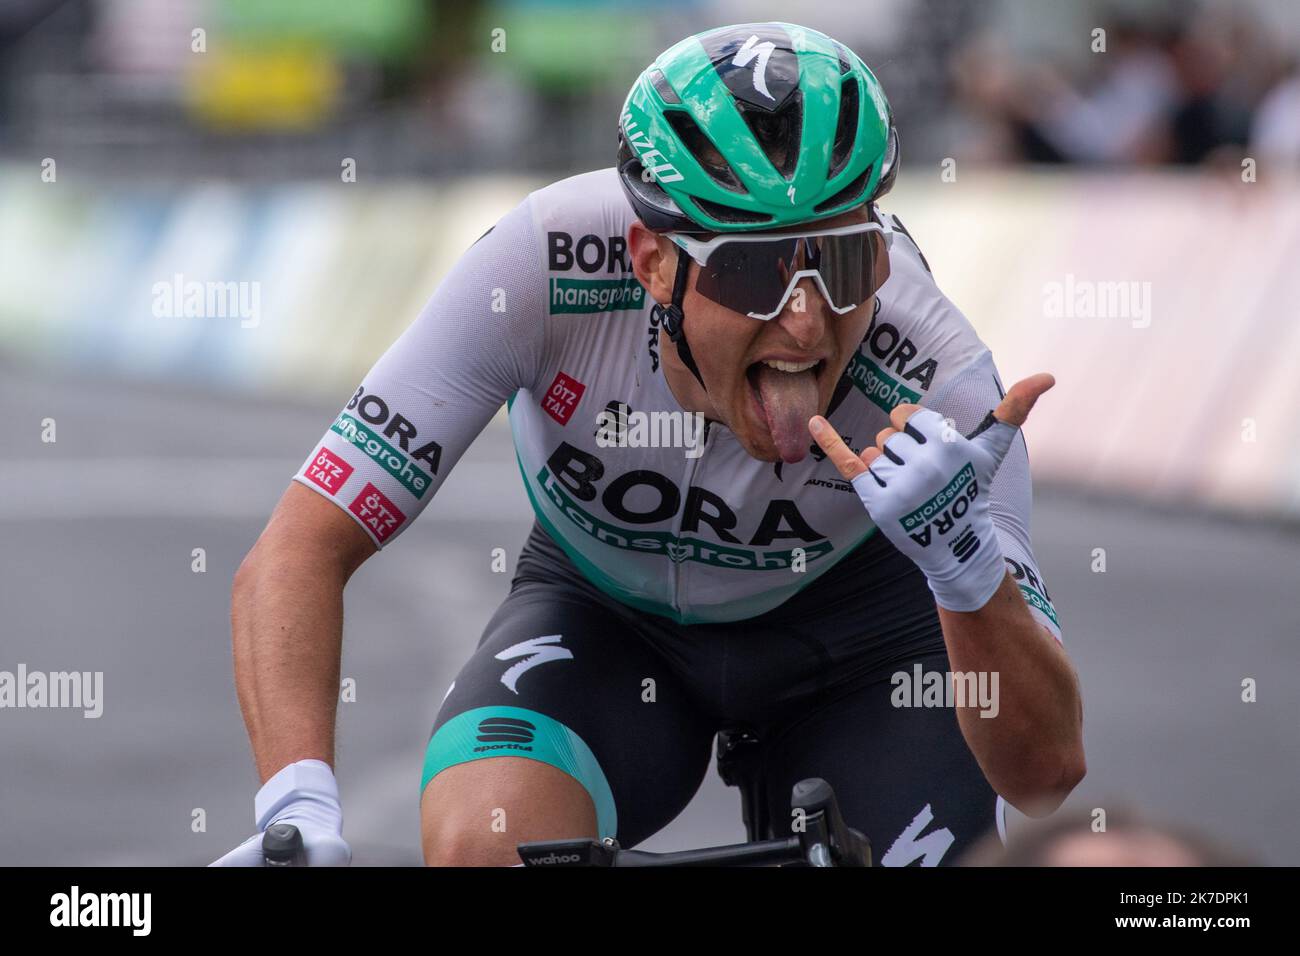 ©PHOTOPQR/LA MONTAGNE/Thierry LINDAUER ; ; 31/05/2021 ; cyclisme criterium du dauphine, etape brioude saugues, POSTLBERGER Lukas, le 31 mai 2021, photo thierry Lindauer second stage of the 73rd edition of the Criterium du Dauphine cycling race, 173 km between Brioude and Saugues, France, Monday 31 May 2021 Stock Photo